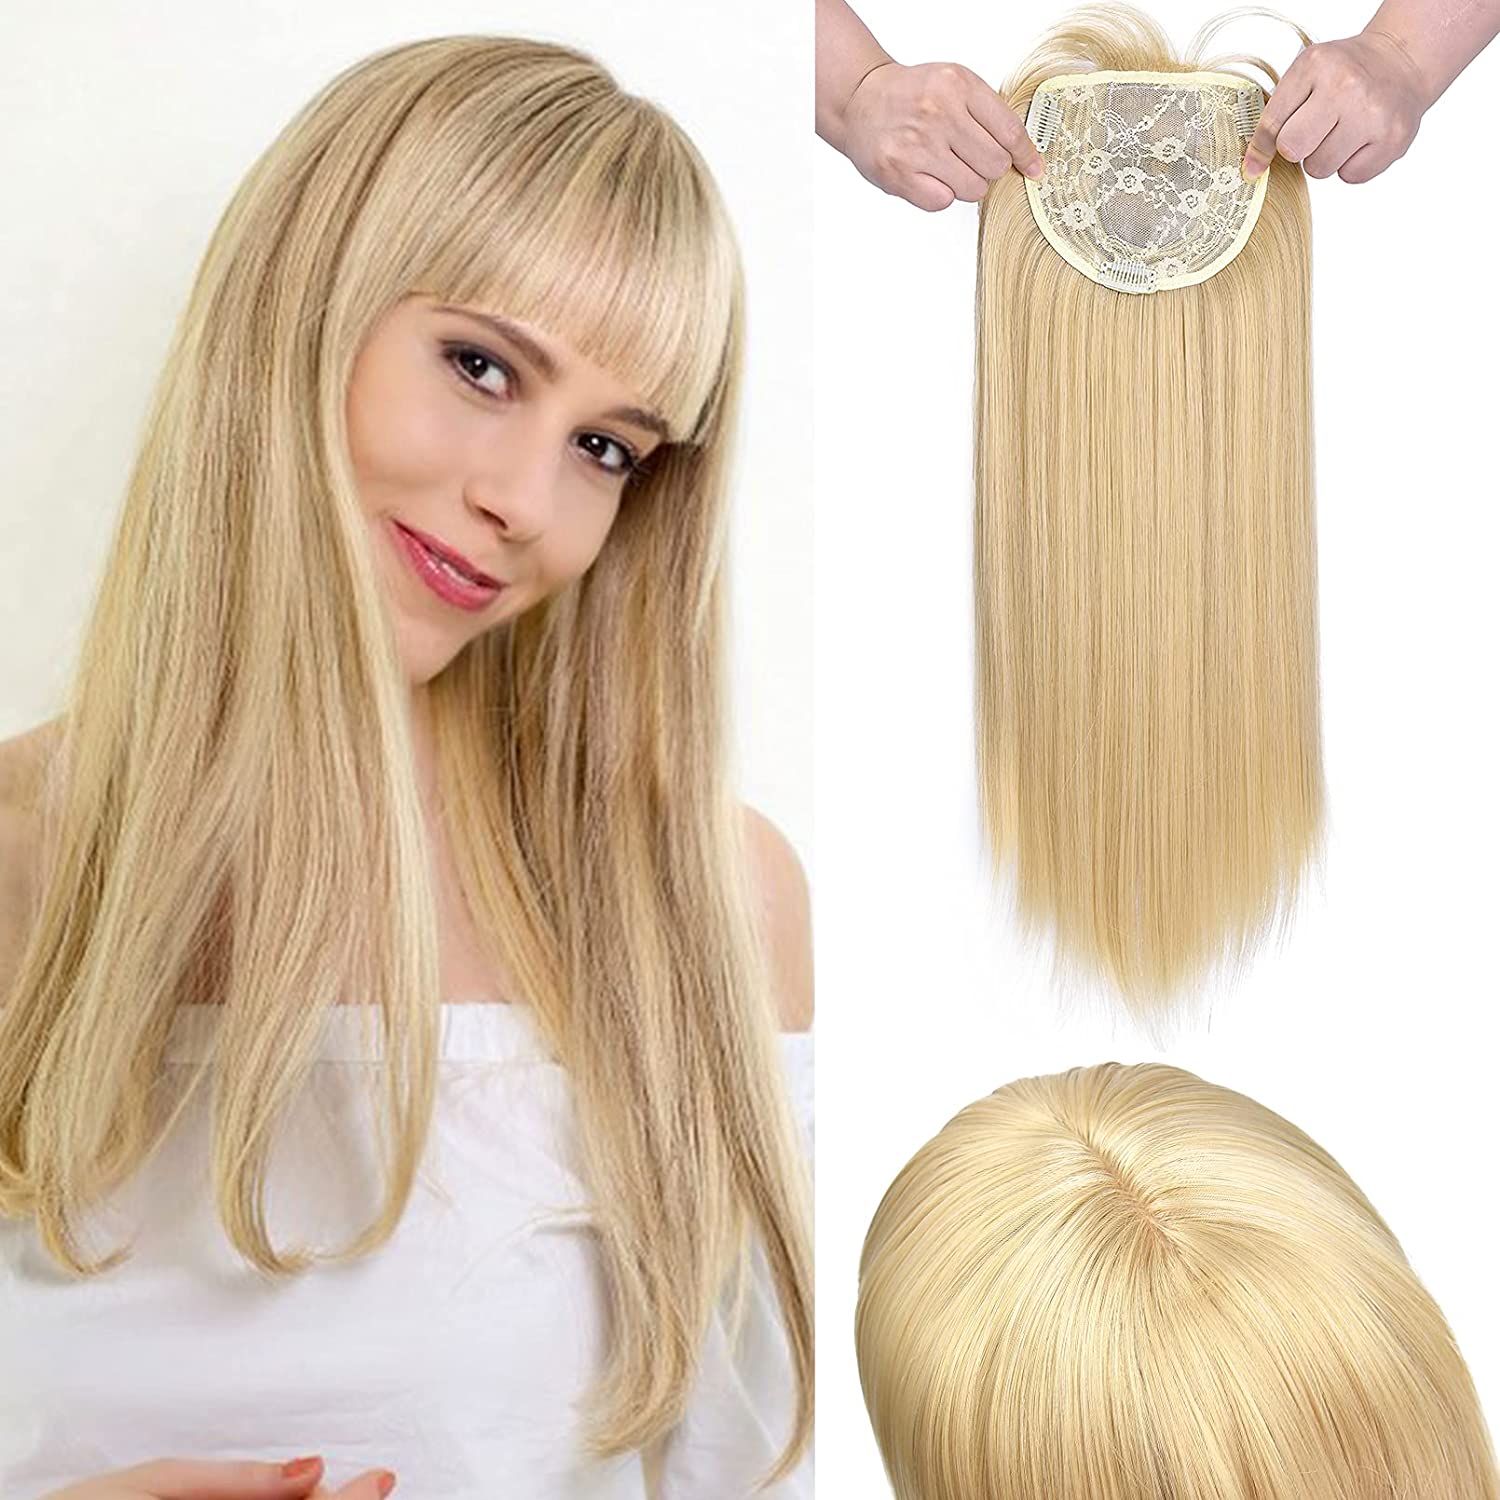 Shaggy Layered Pigtail Extensions in Blonde